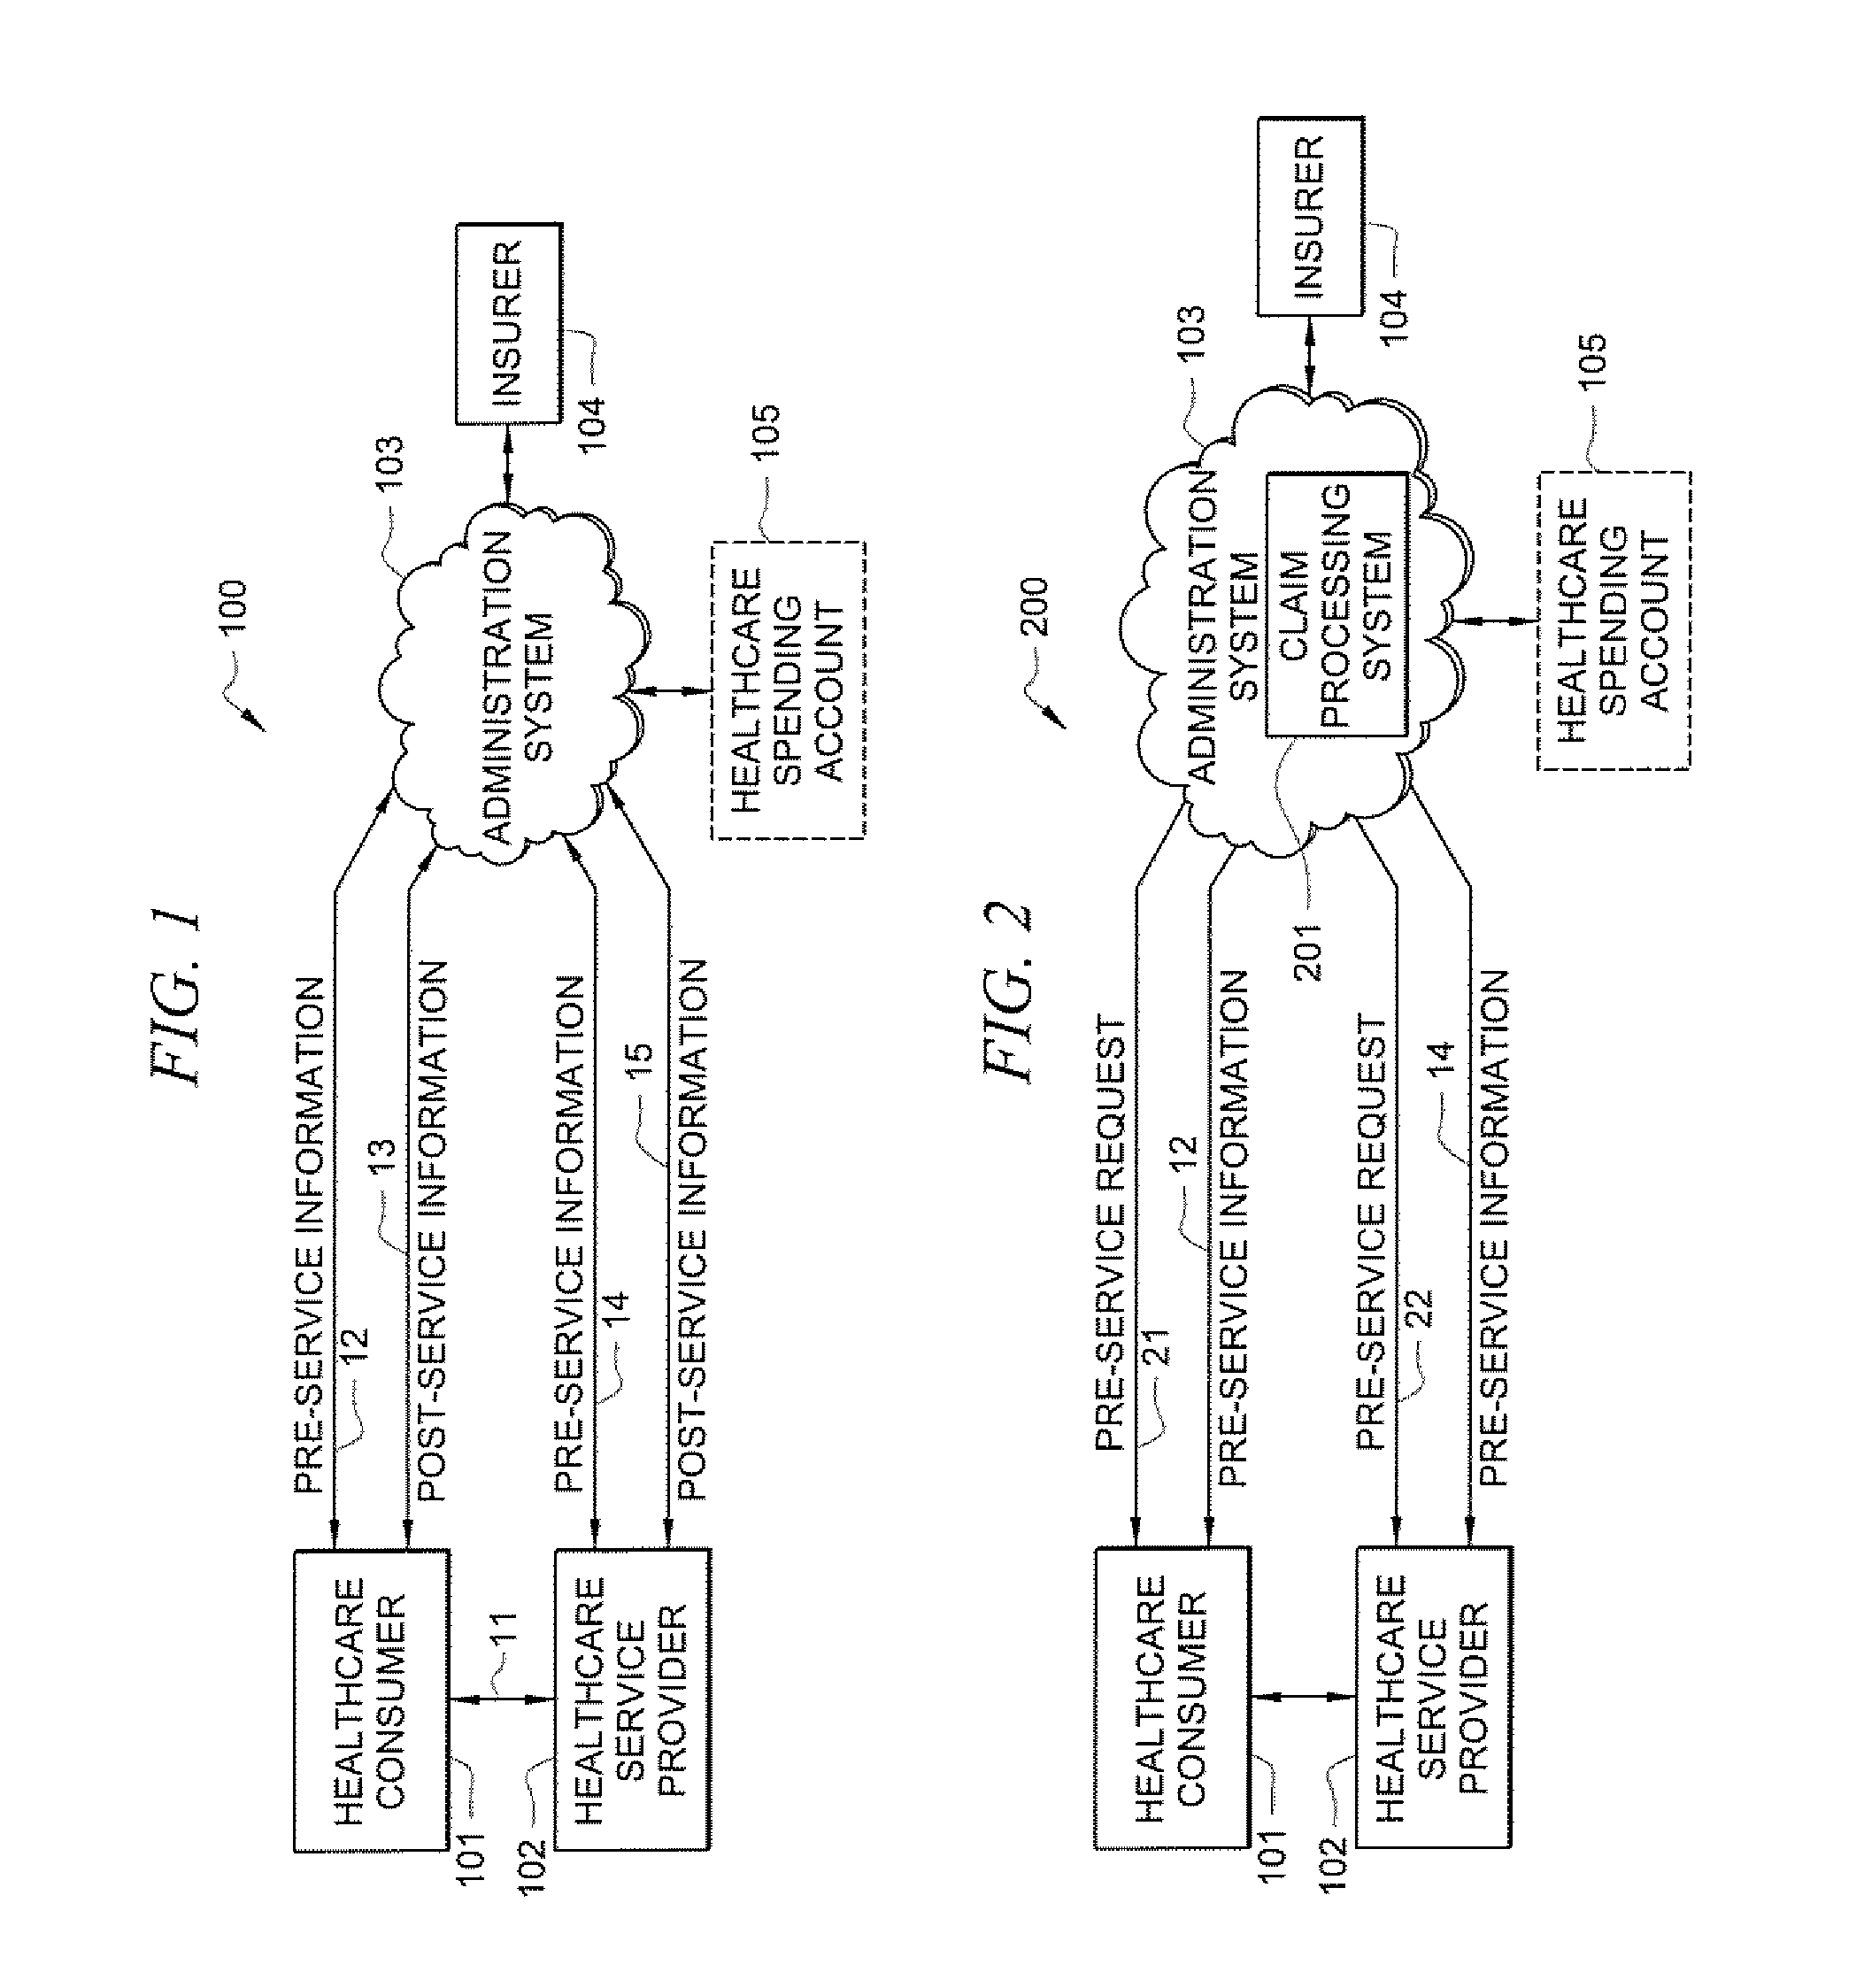 Enhanced systems and methods for processing of healthcare information